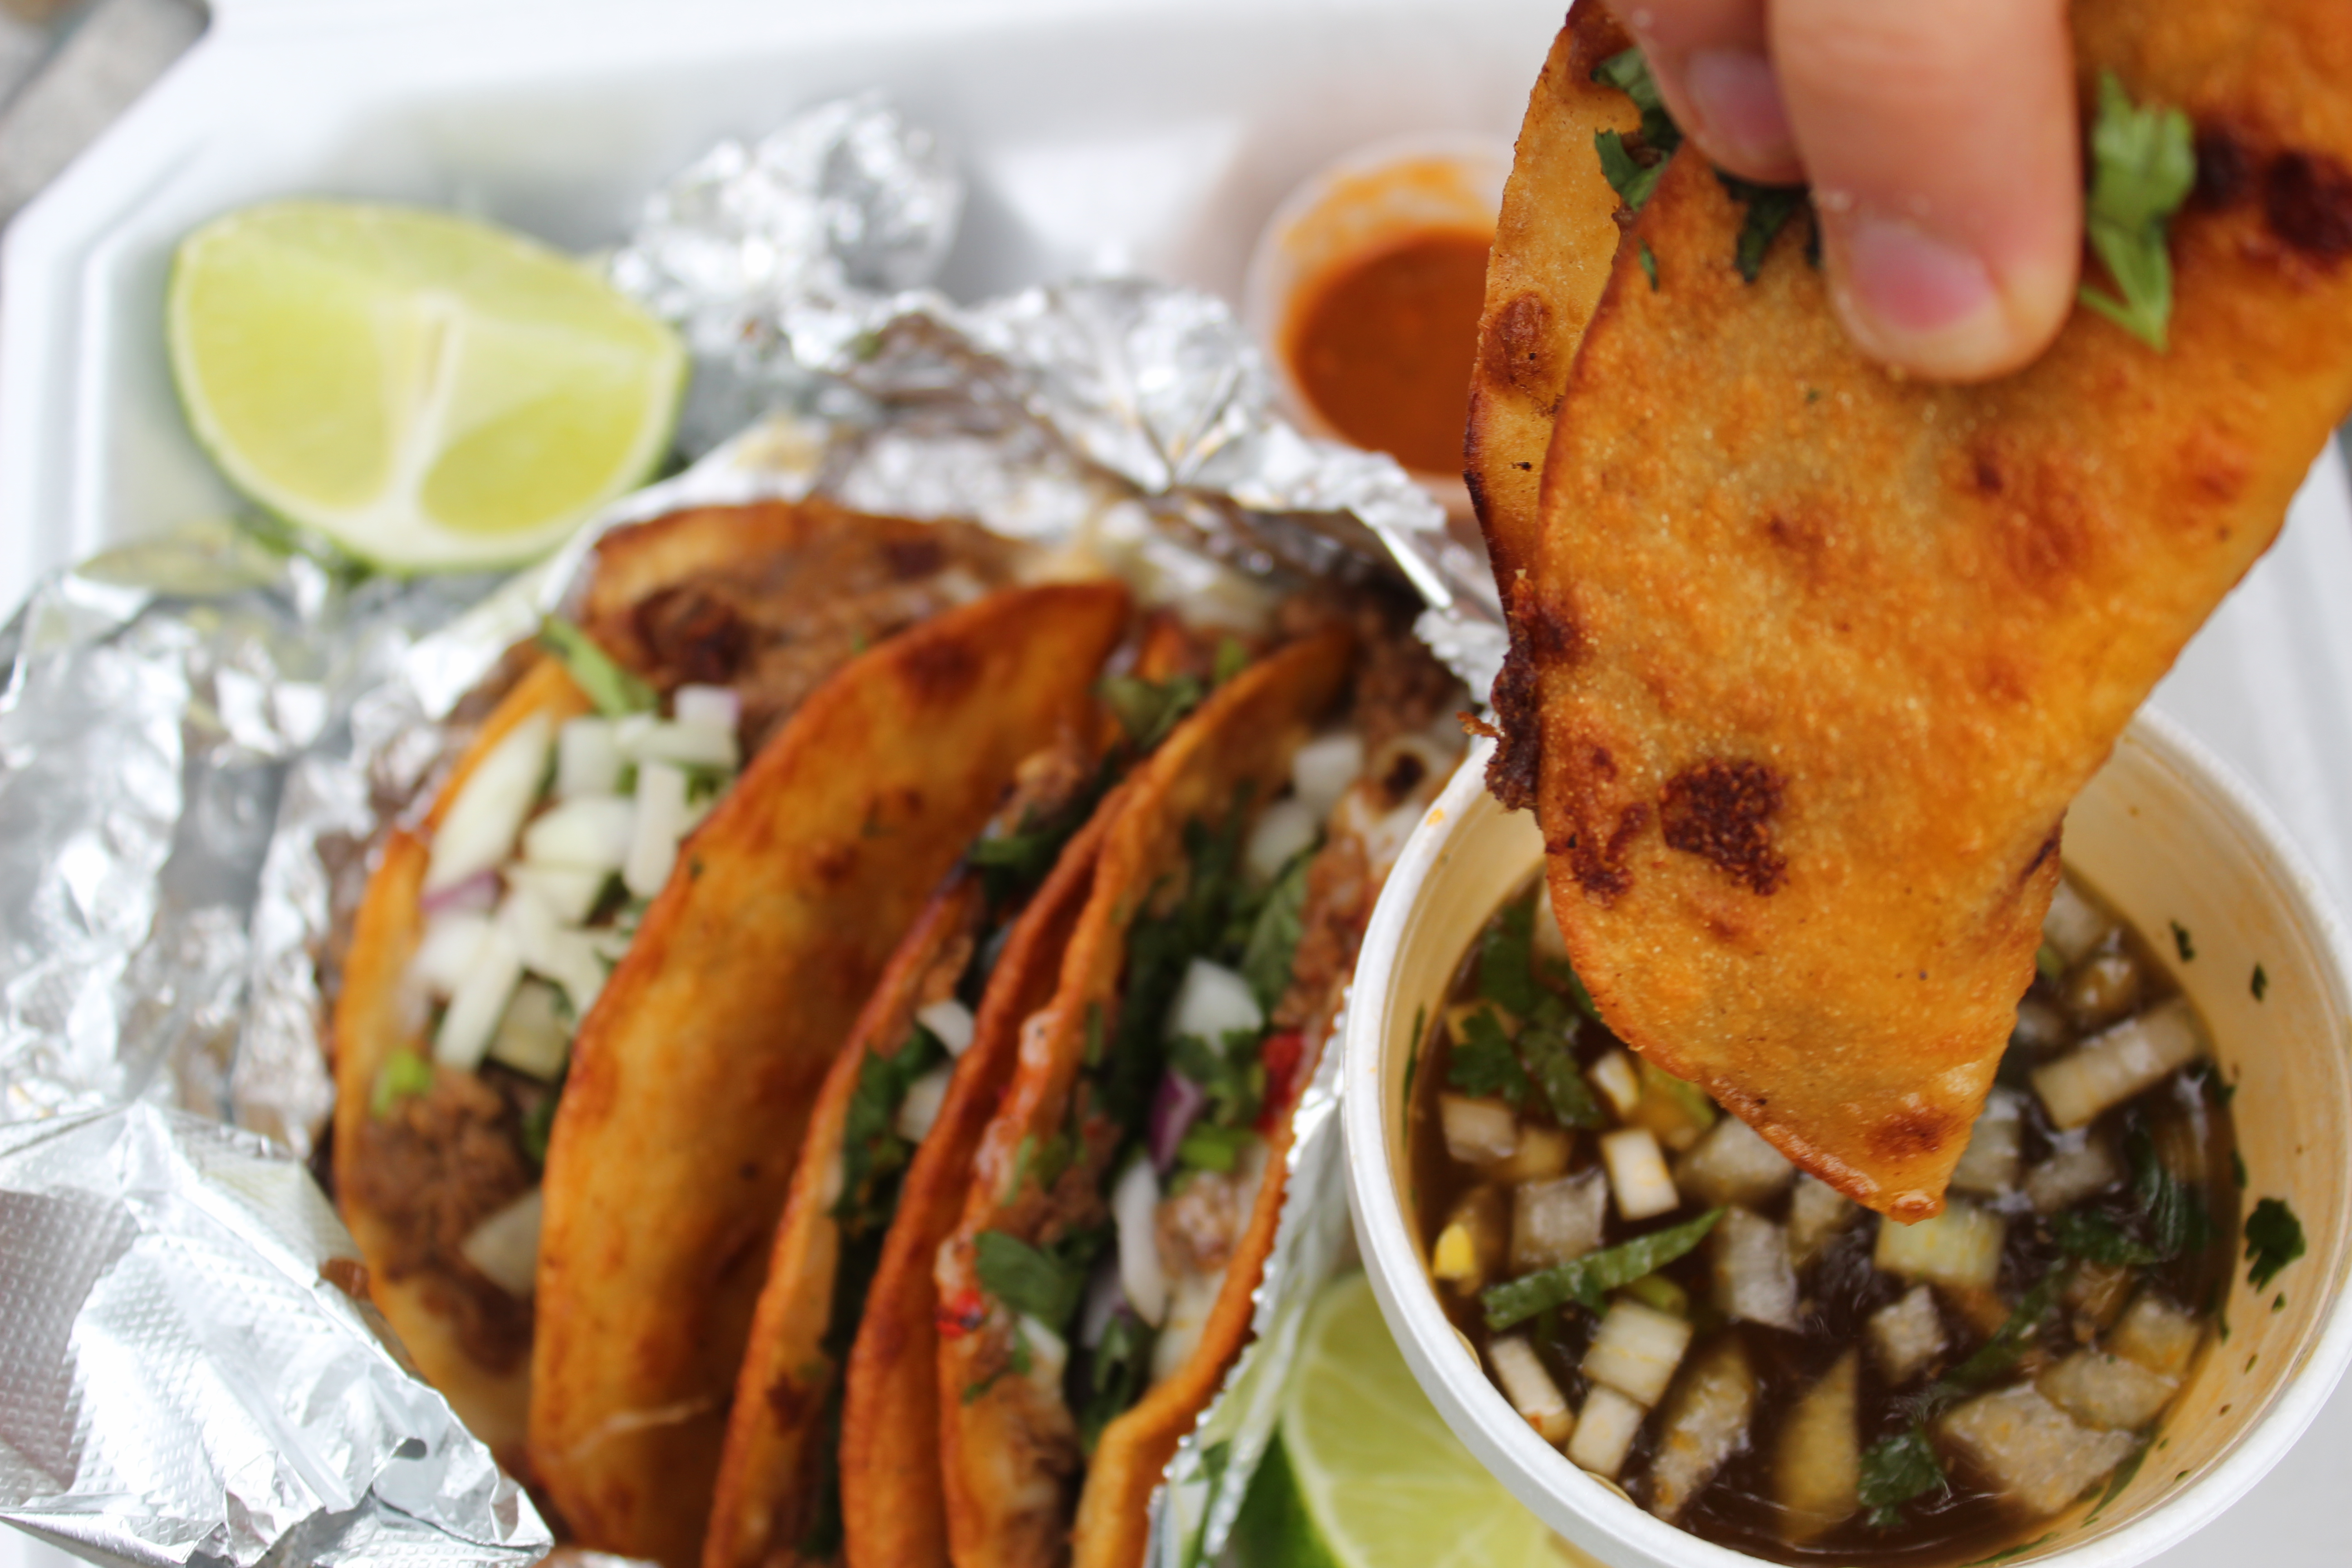 Birria is big: Where to find these braised beef tacos in Baton Rouge